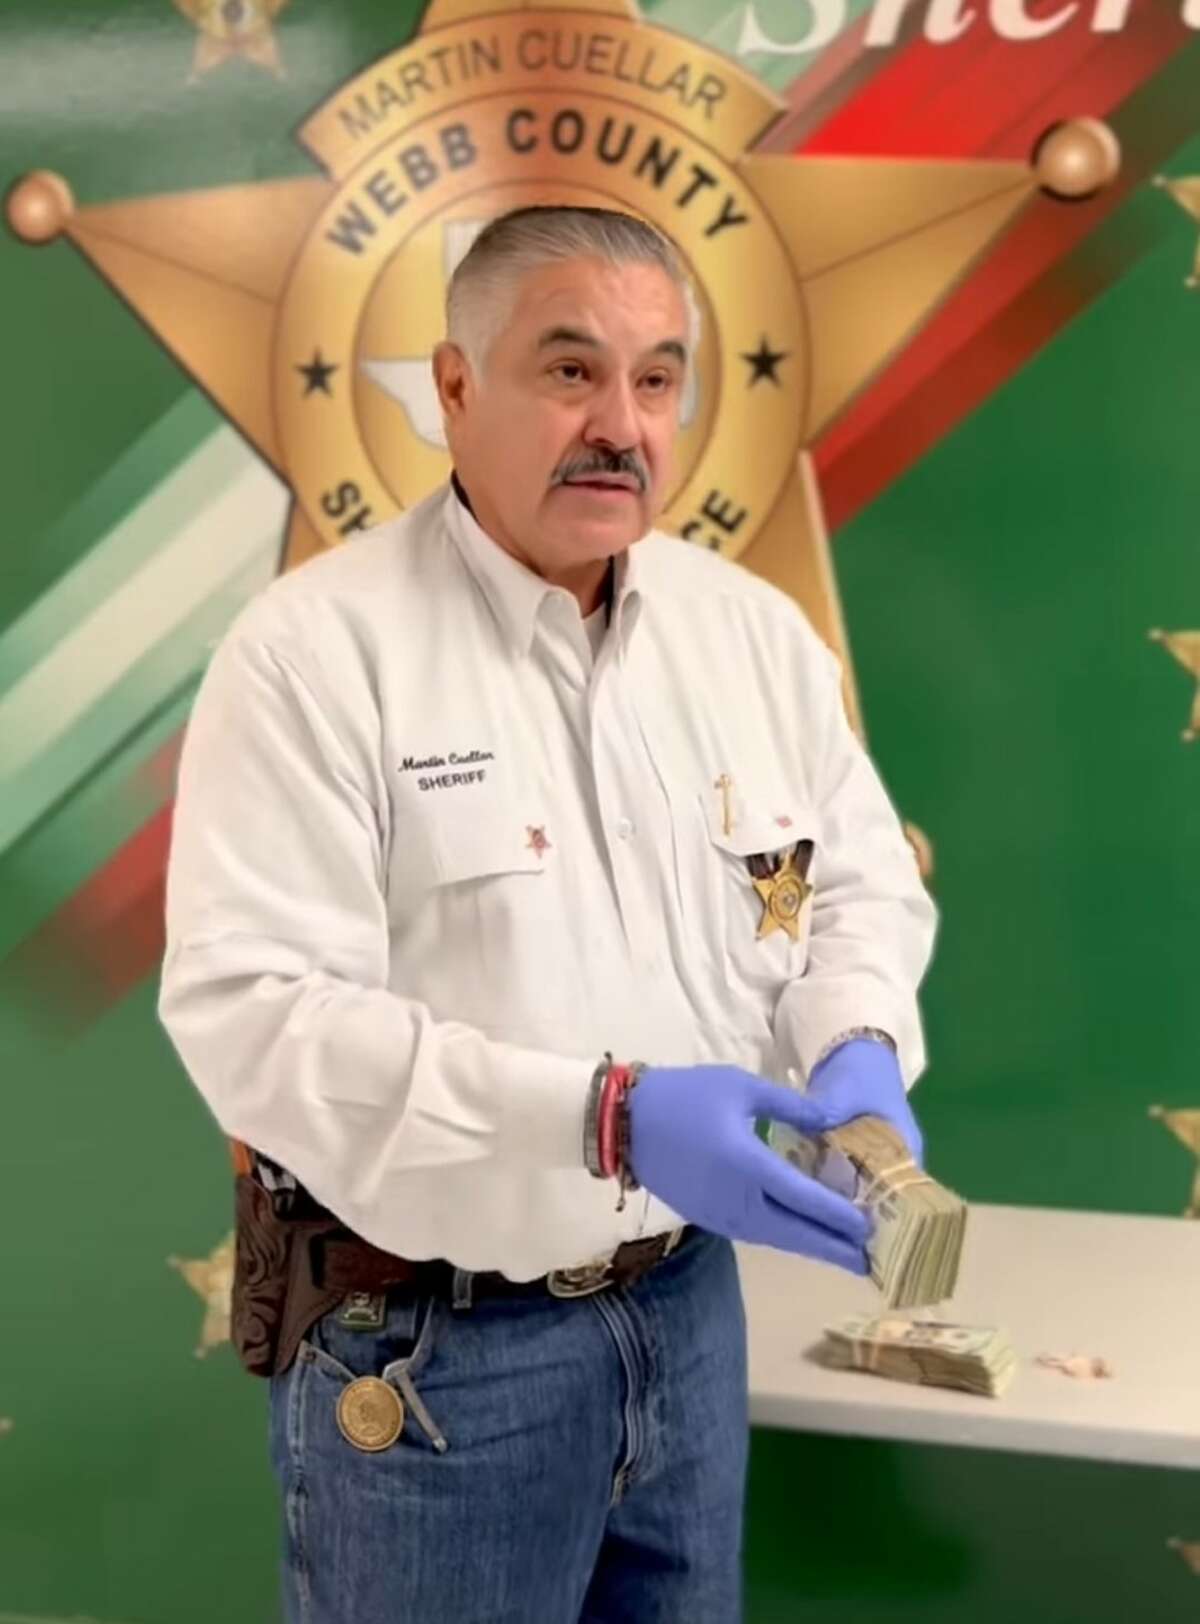 Webb County Sheriff Martin Cuellar talks about the seizure of $17,000. The incident unfolded around noon Oct. 27 on mile marker 21 of Interstate 35.